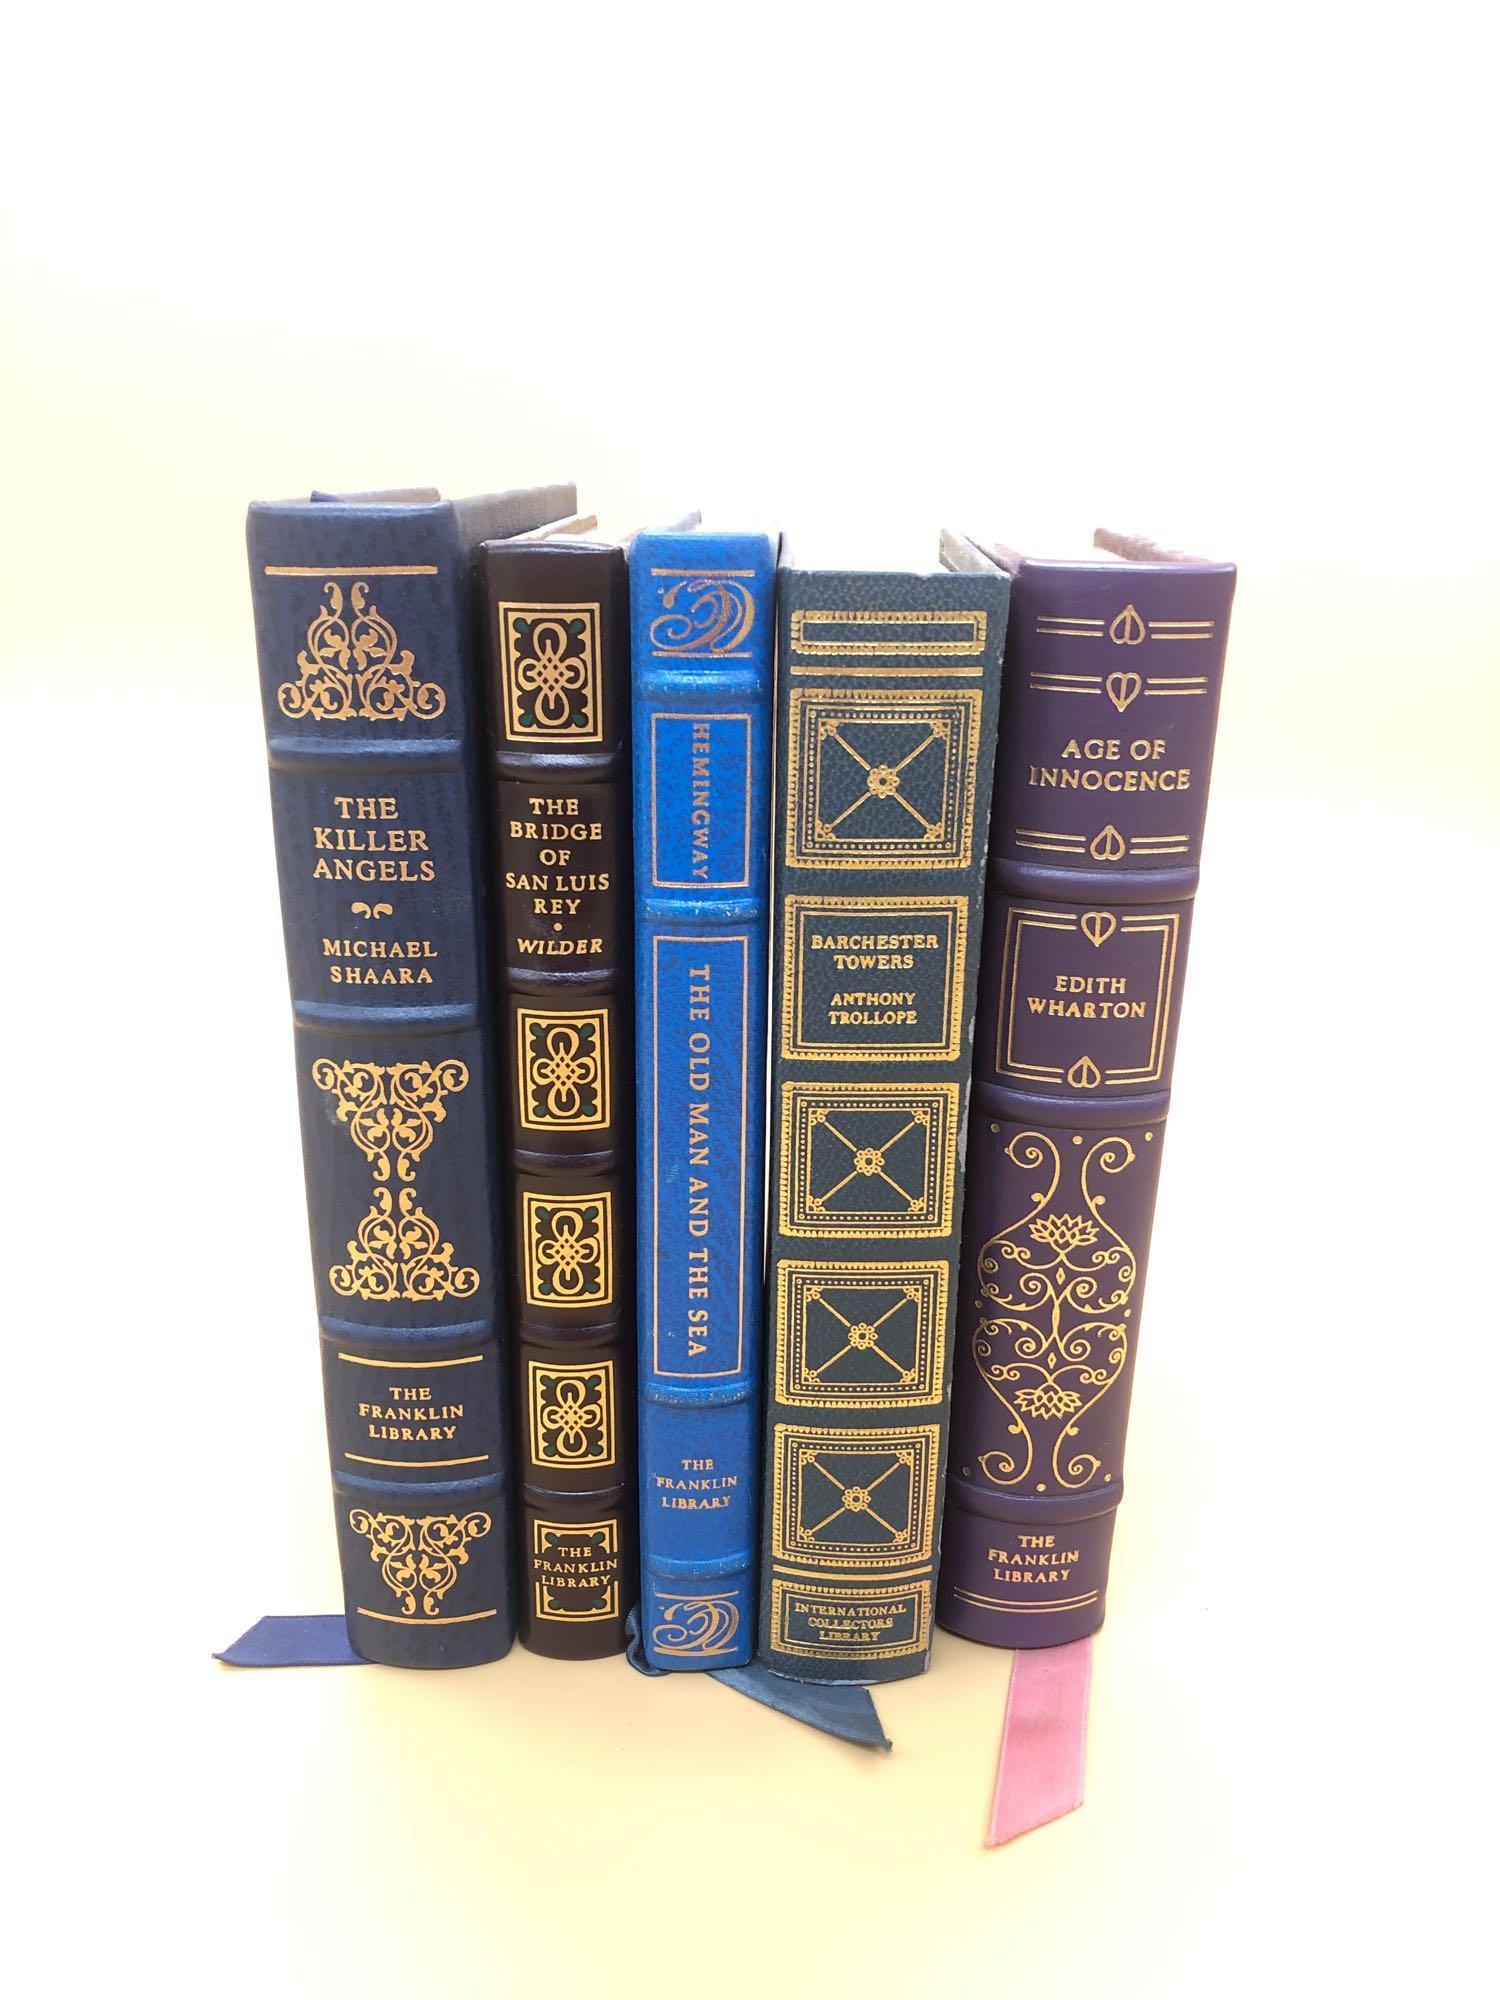 The Franklin Library Collection